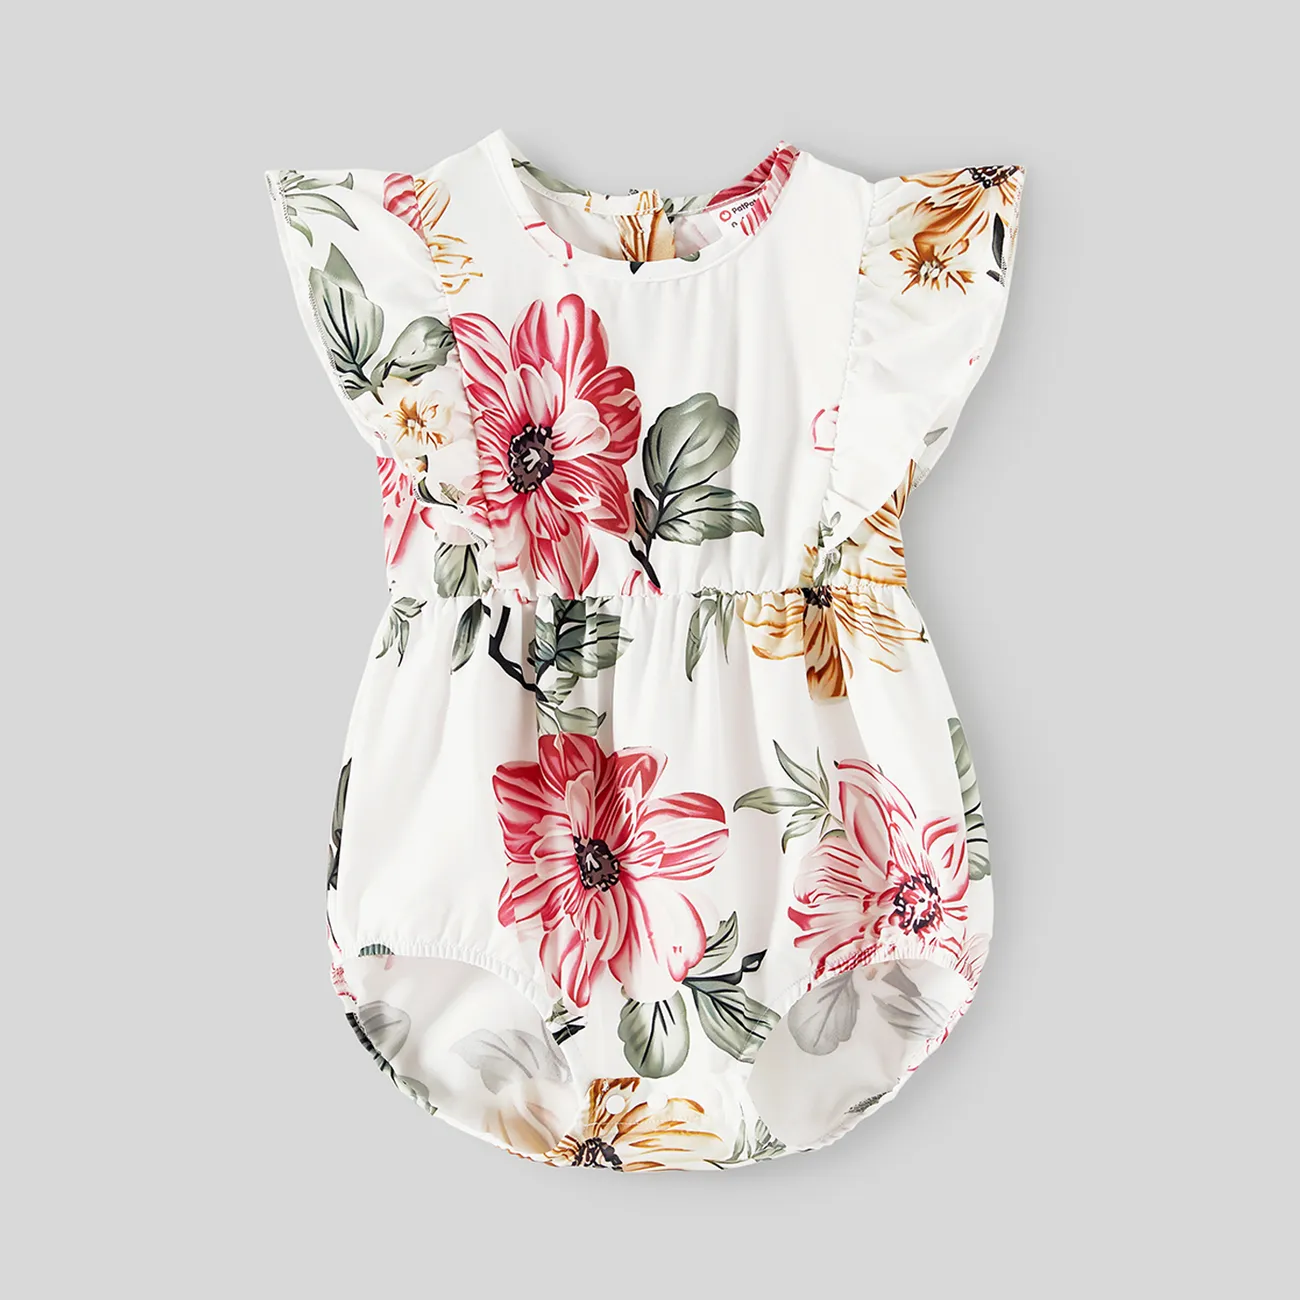 Family Matching Allover Floral Print Notched Neck Belted Dresses and Short-sleeve Colorblock T-shirts Sets  big image 1